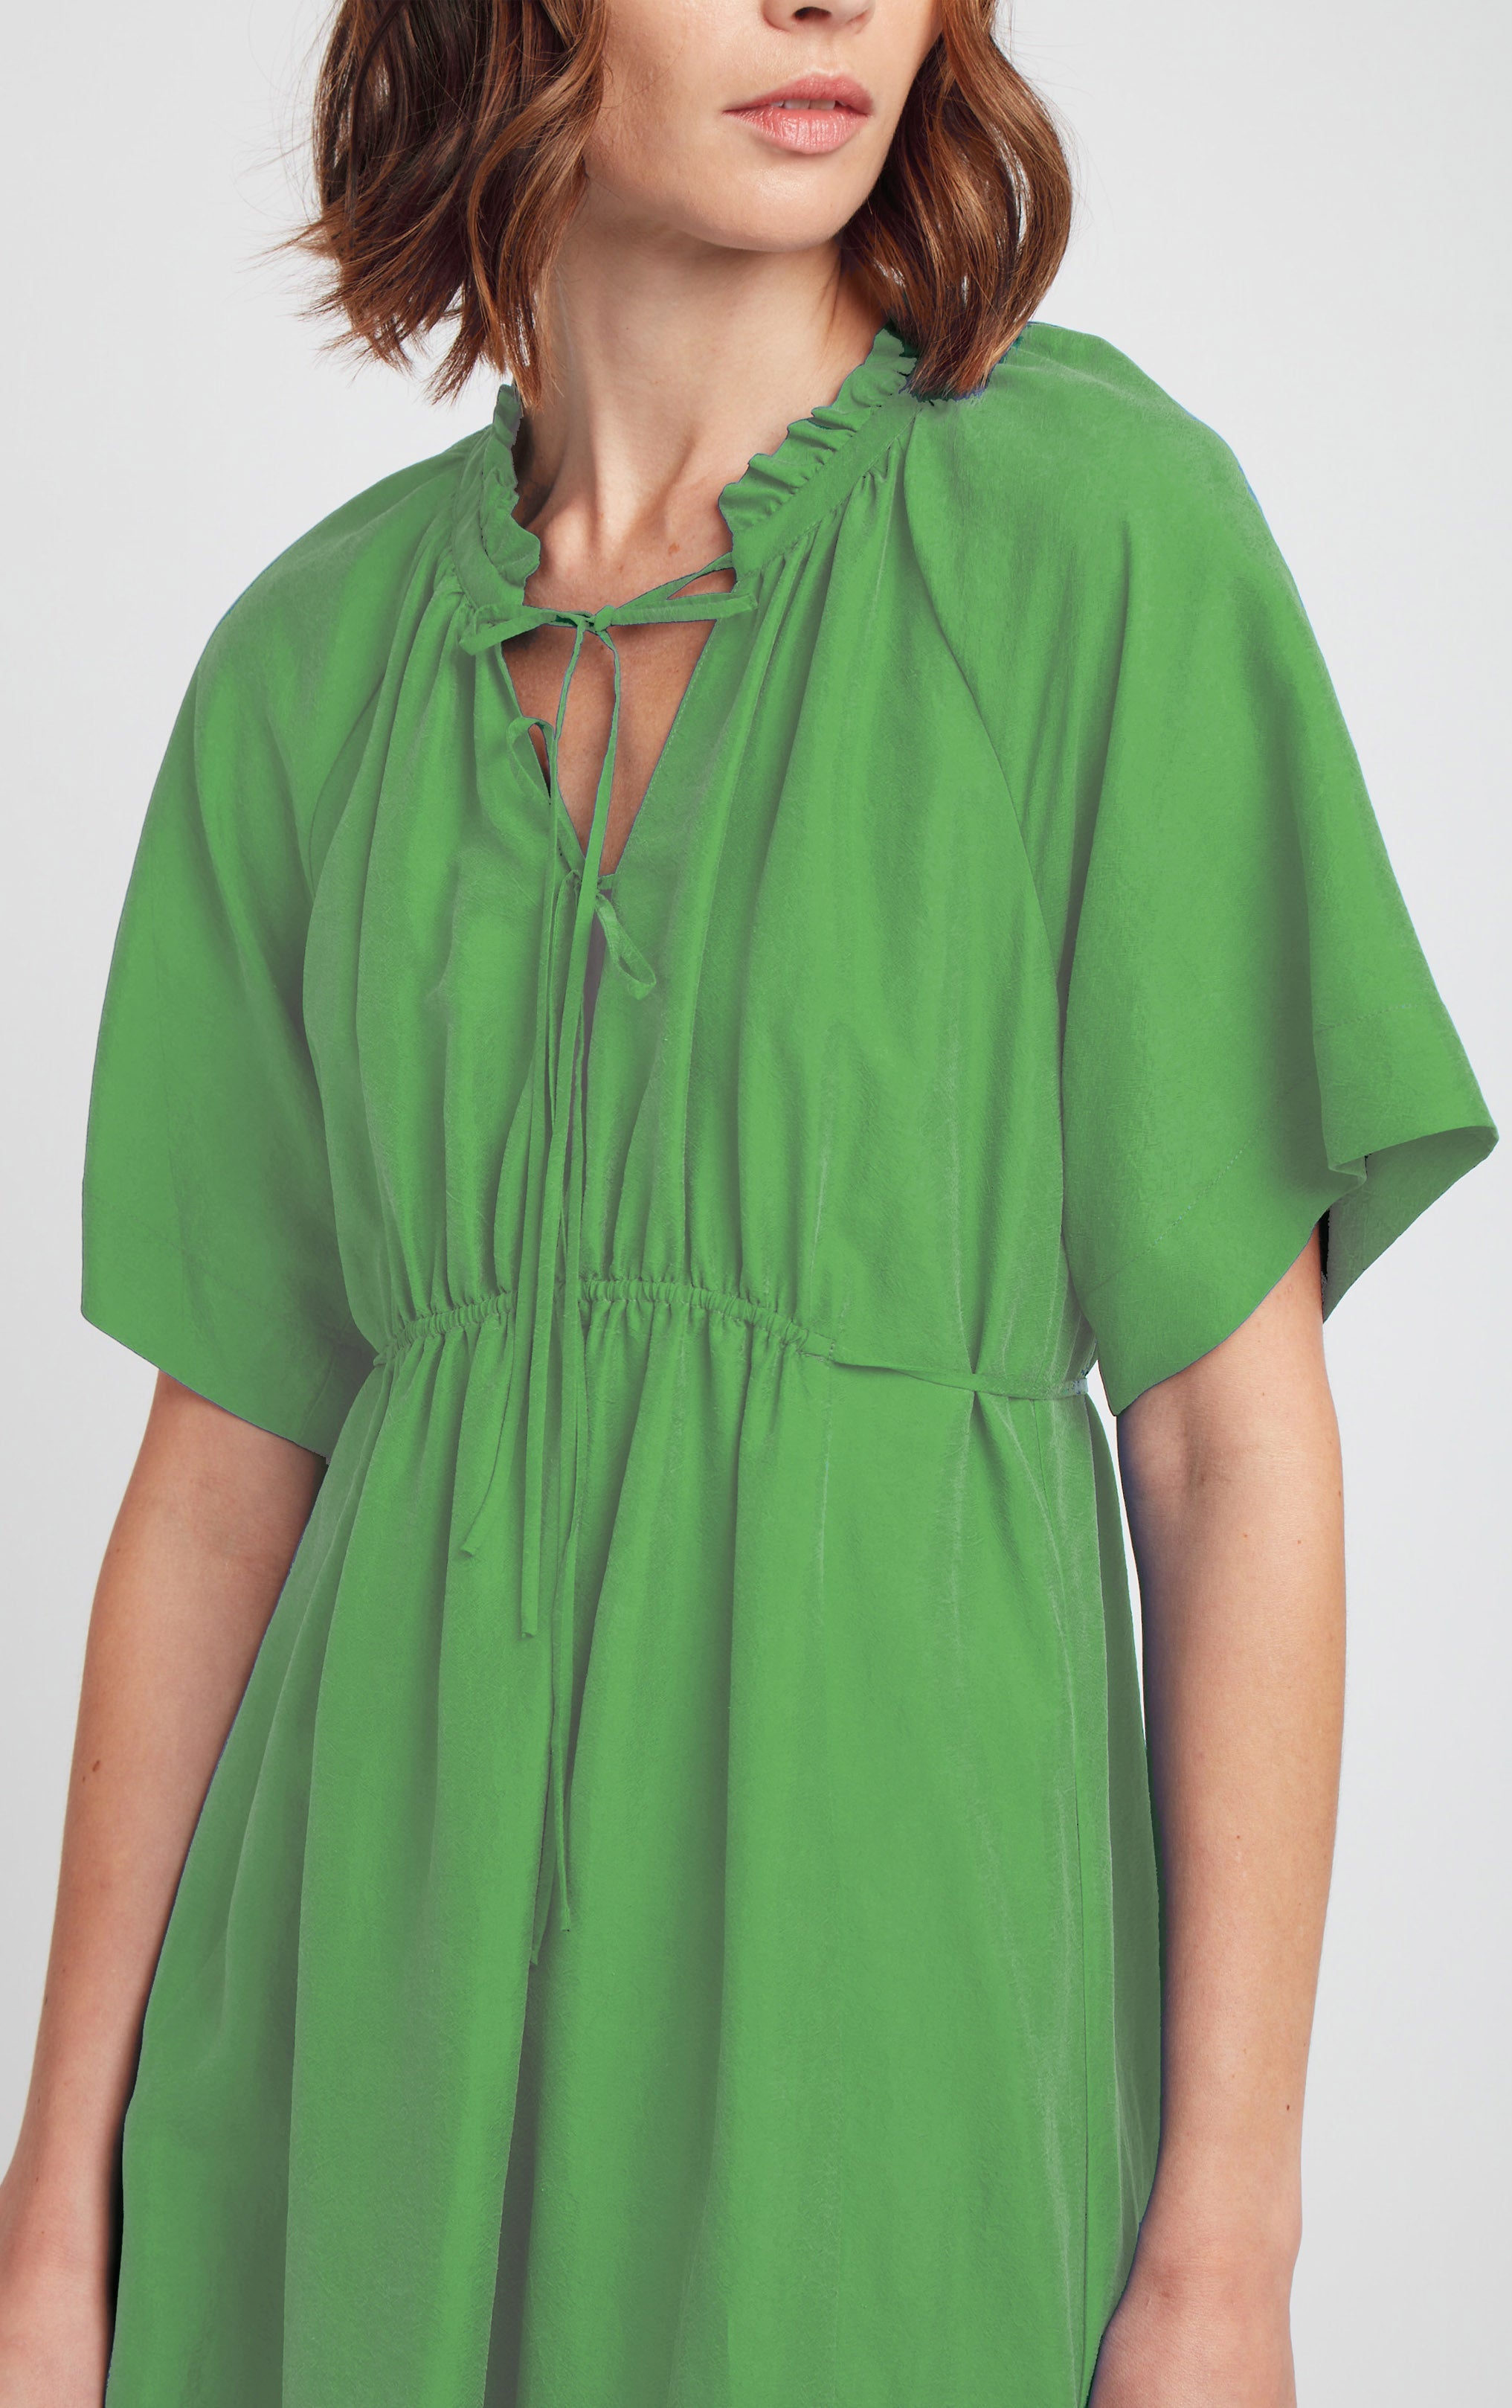 front view of woman wearing green short sleeved silk dress with ruffled neck trim and rusched neck